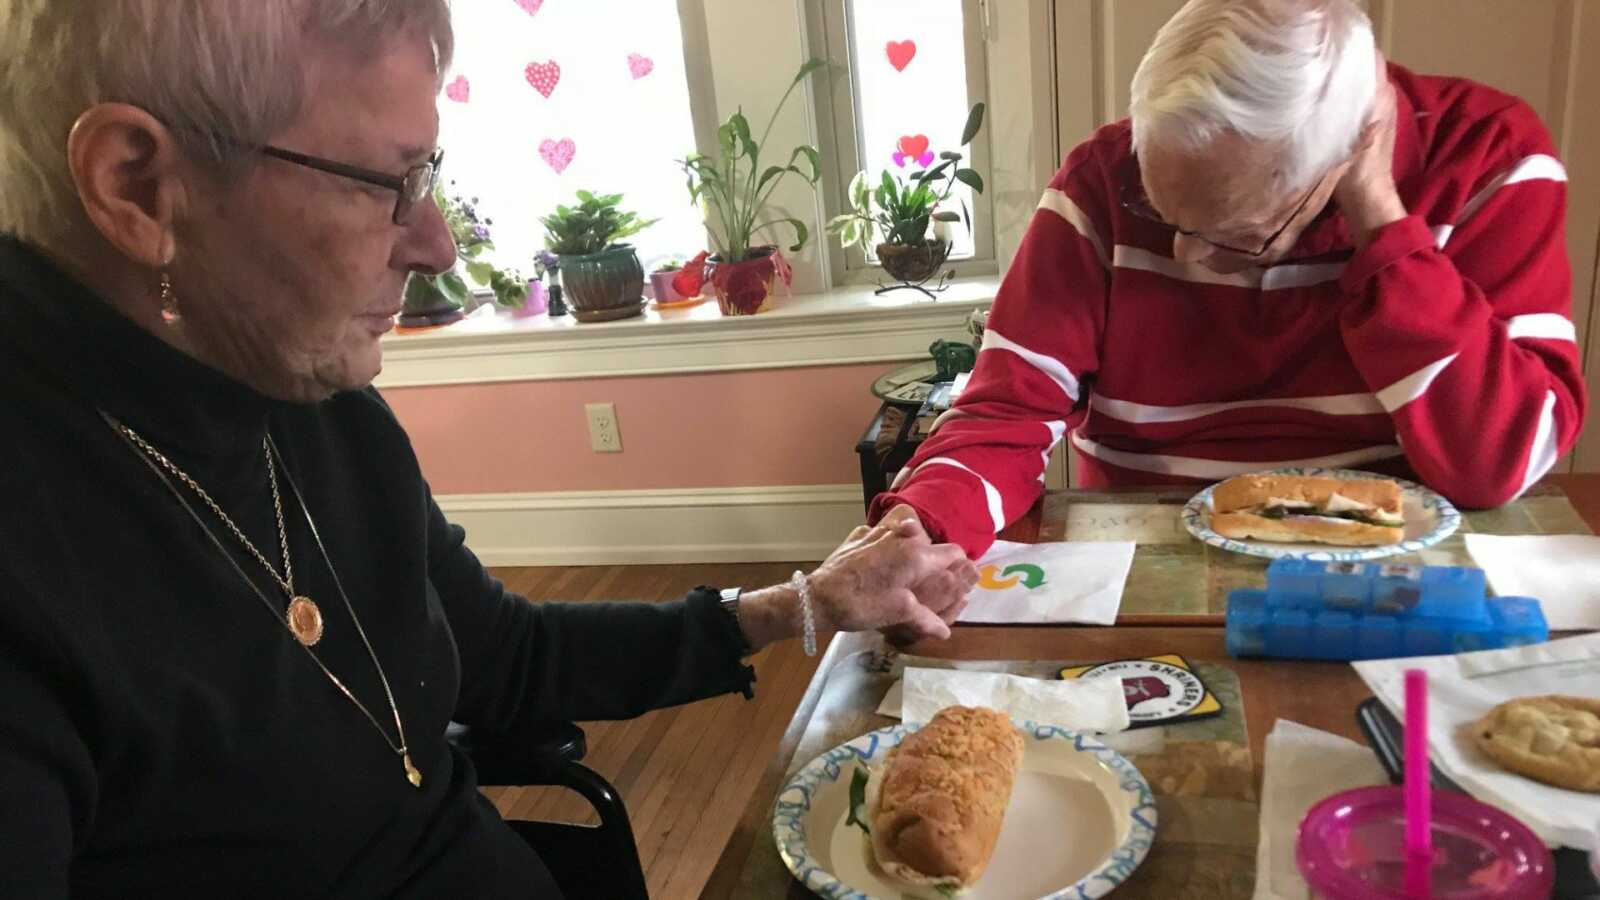 elderly couple sitting at table and praying over food